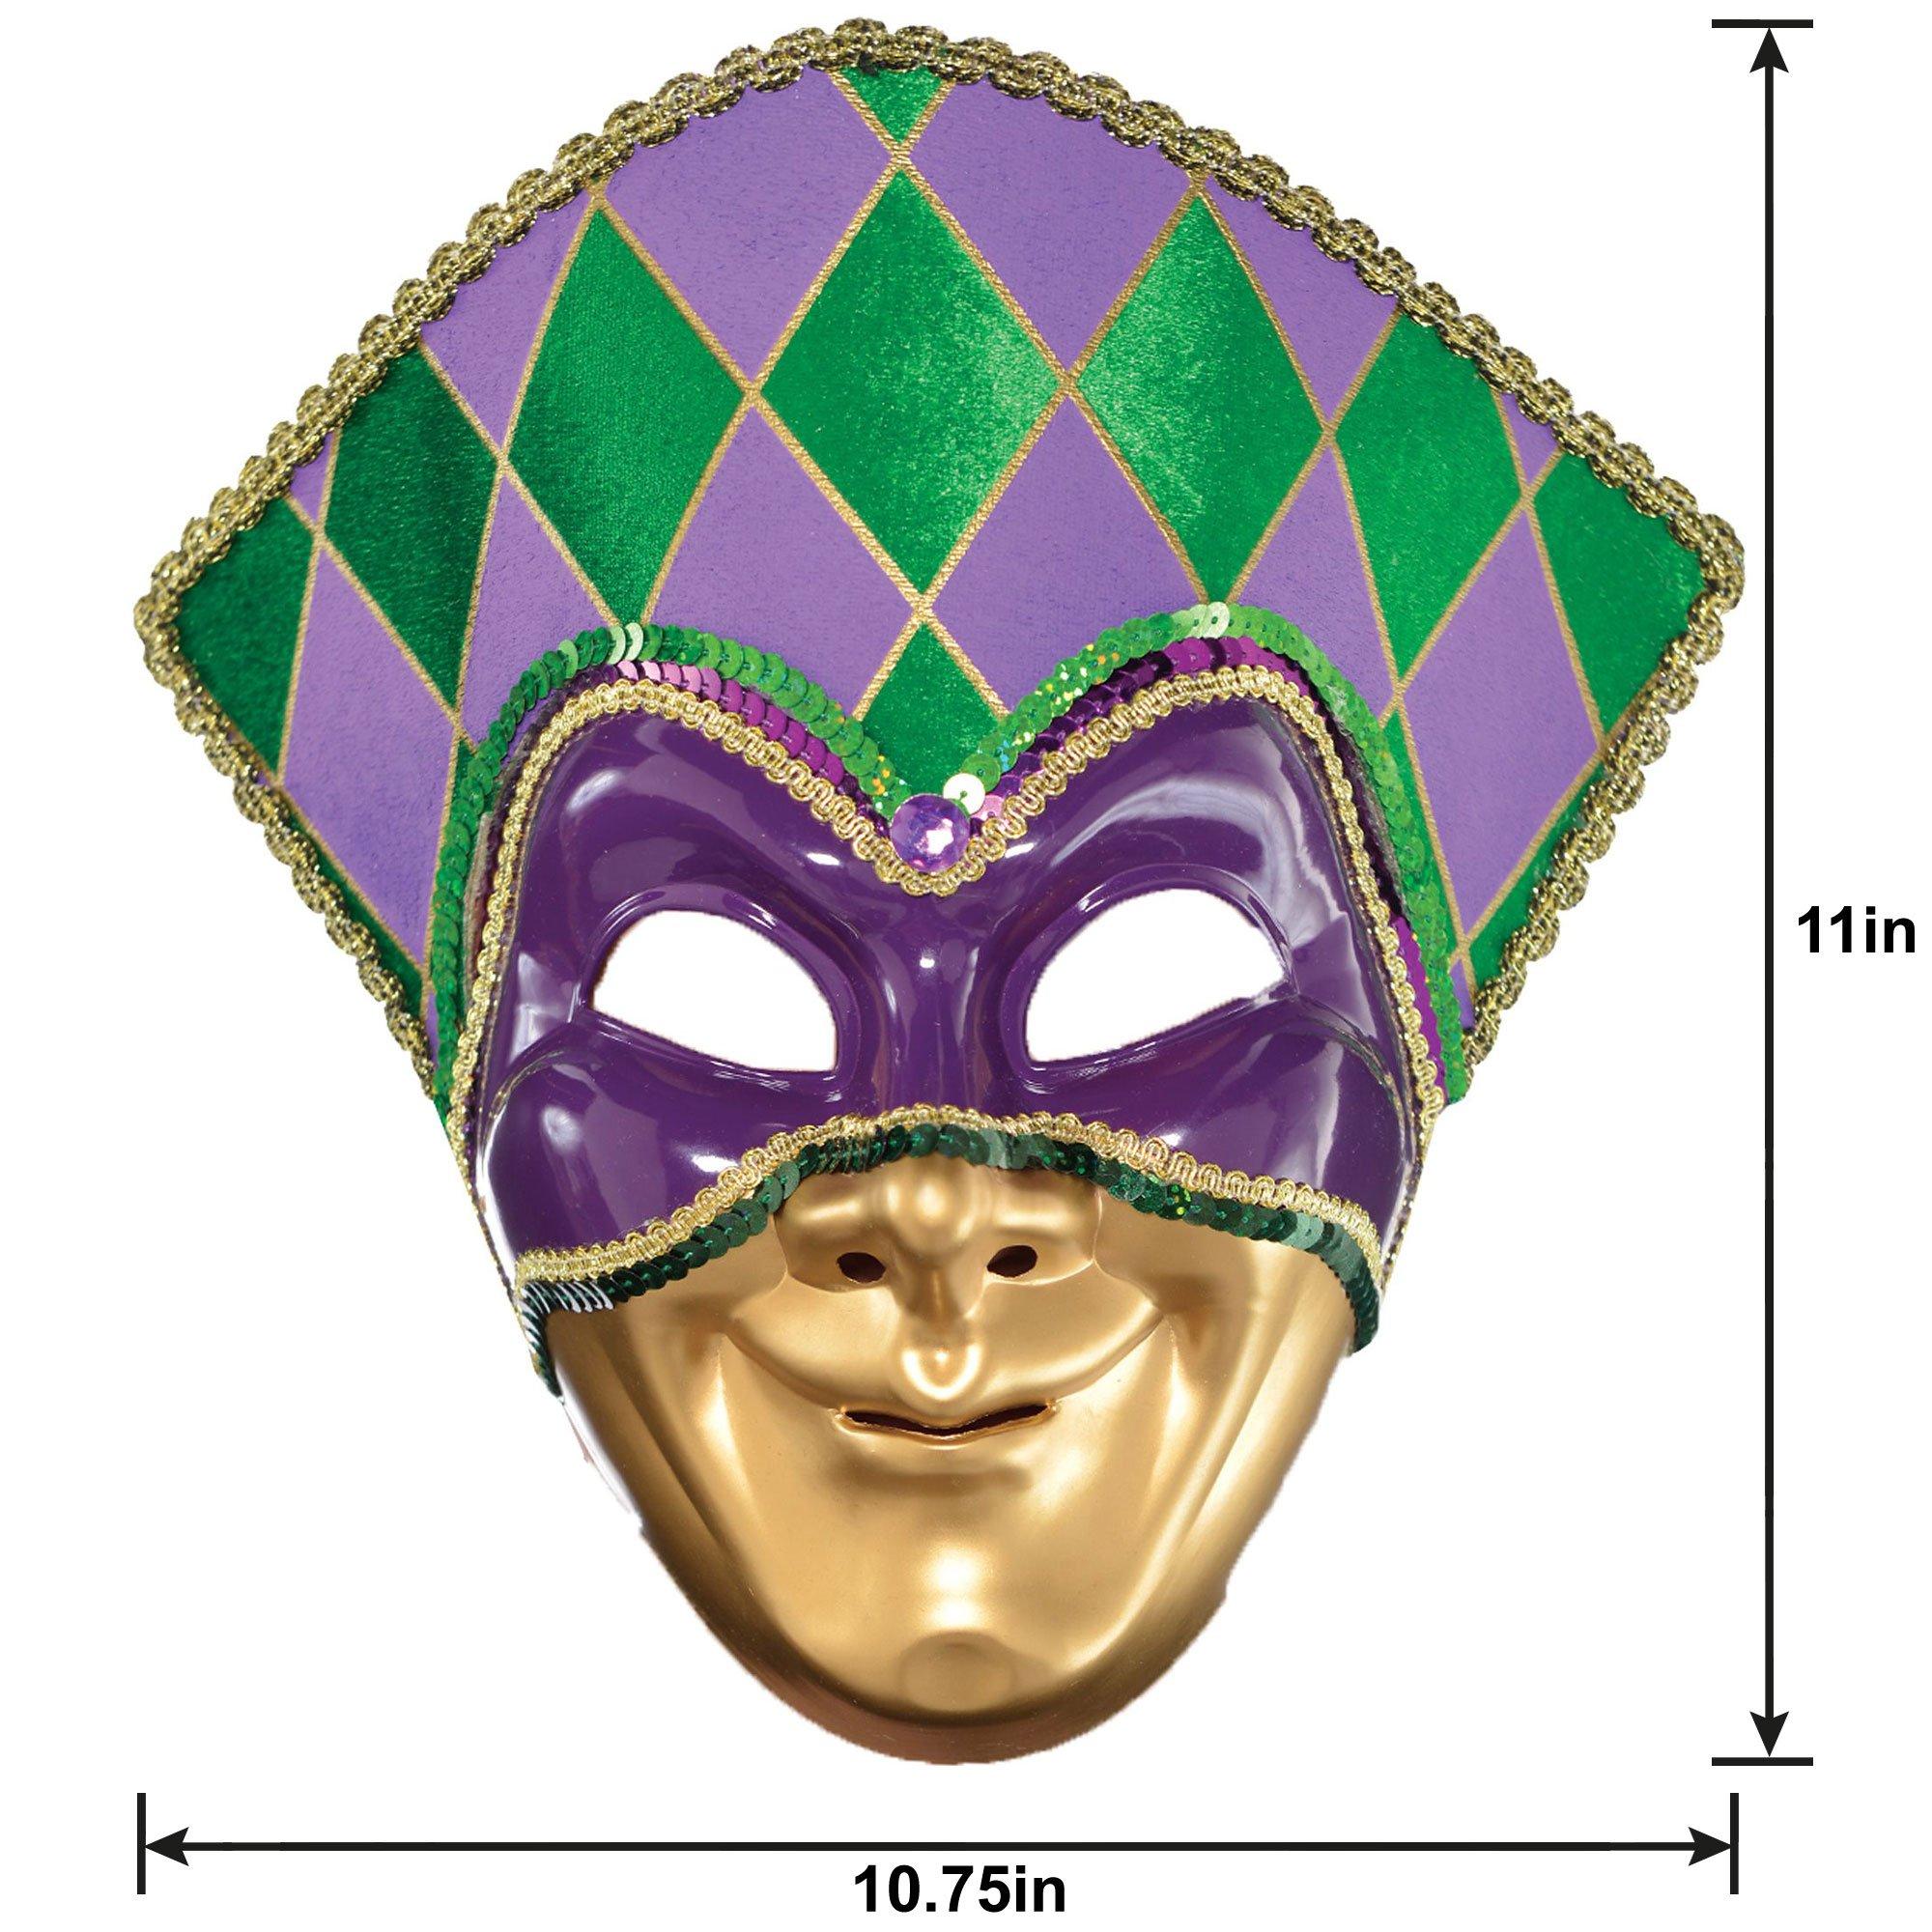 Mardi Gras Patches, Green / One Size